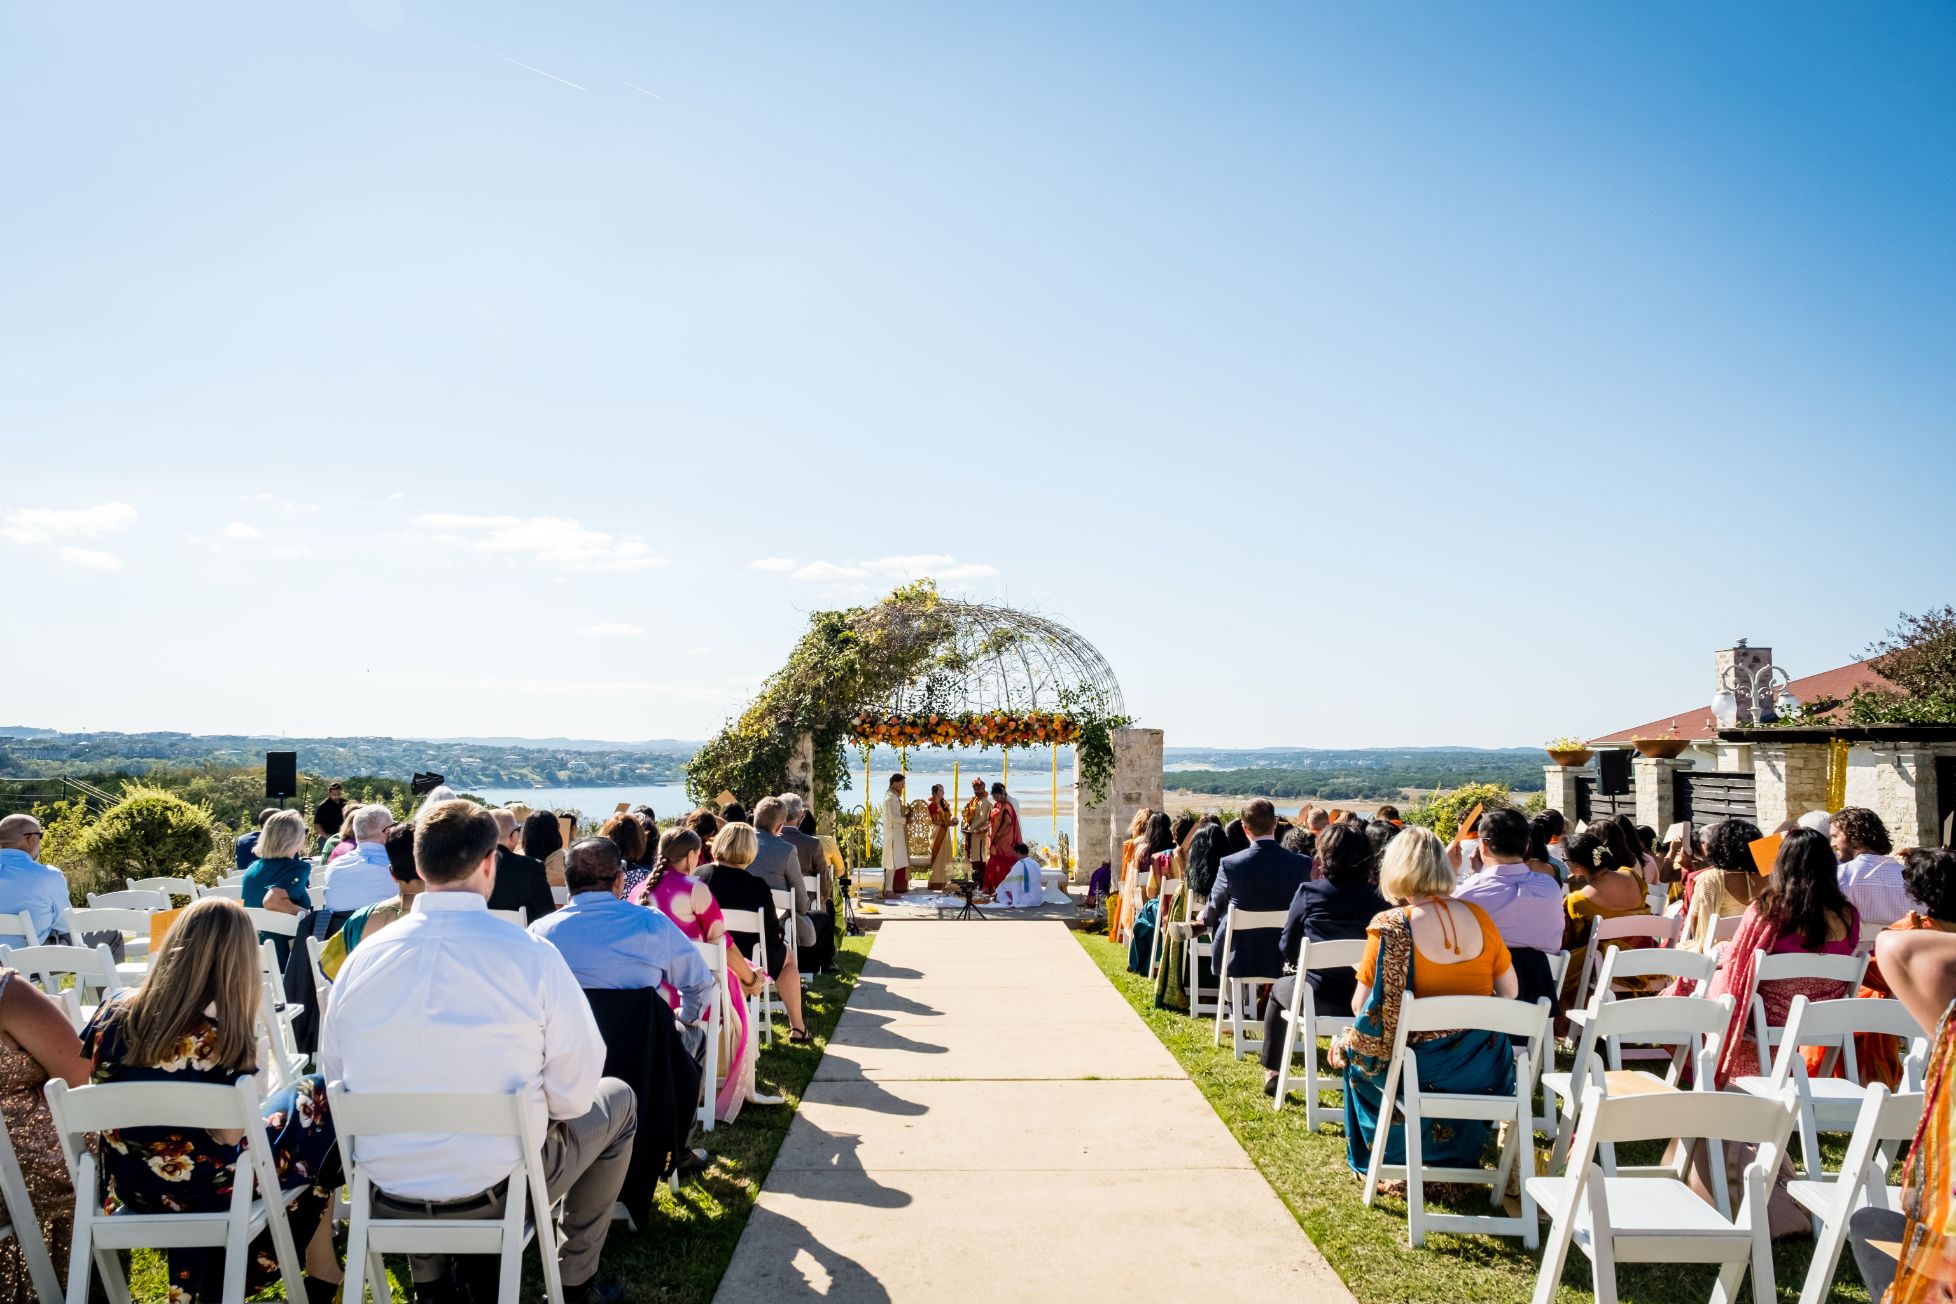 Indian wedding ceremony at Vintage Villas with bright blue sky in the background and Lake Travis views in the distance. Wedding ceremony guests are seated in rows on white lawn chairs.